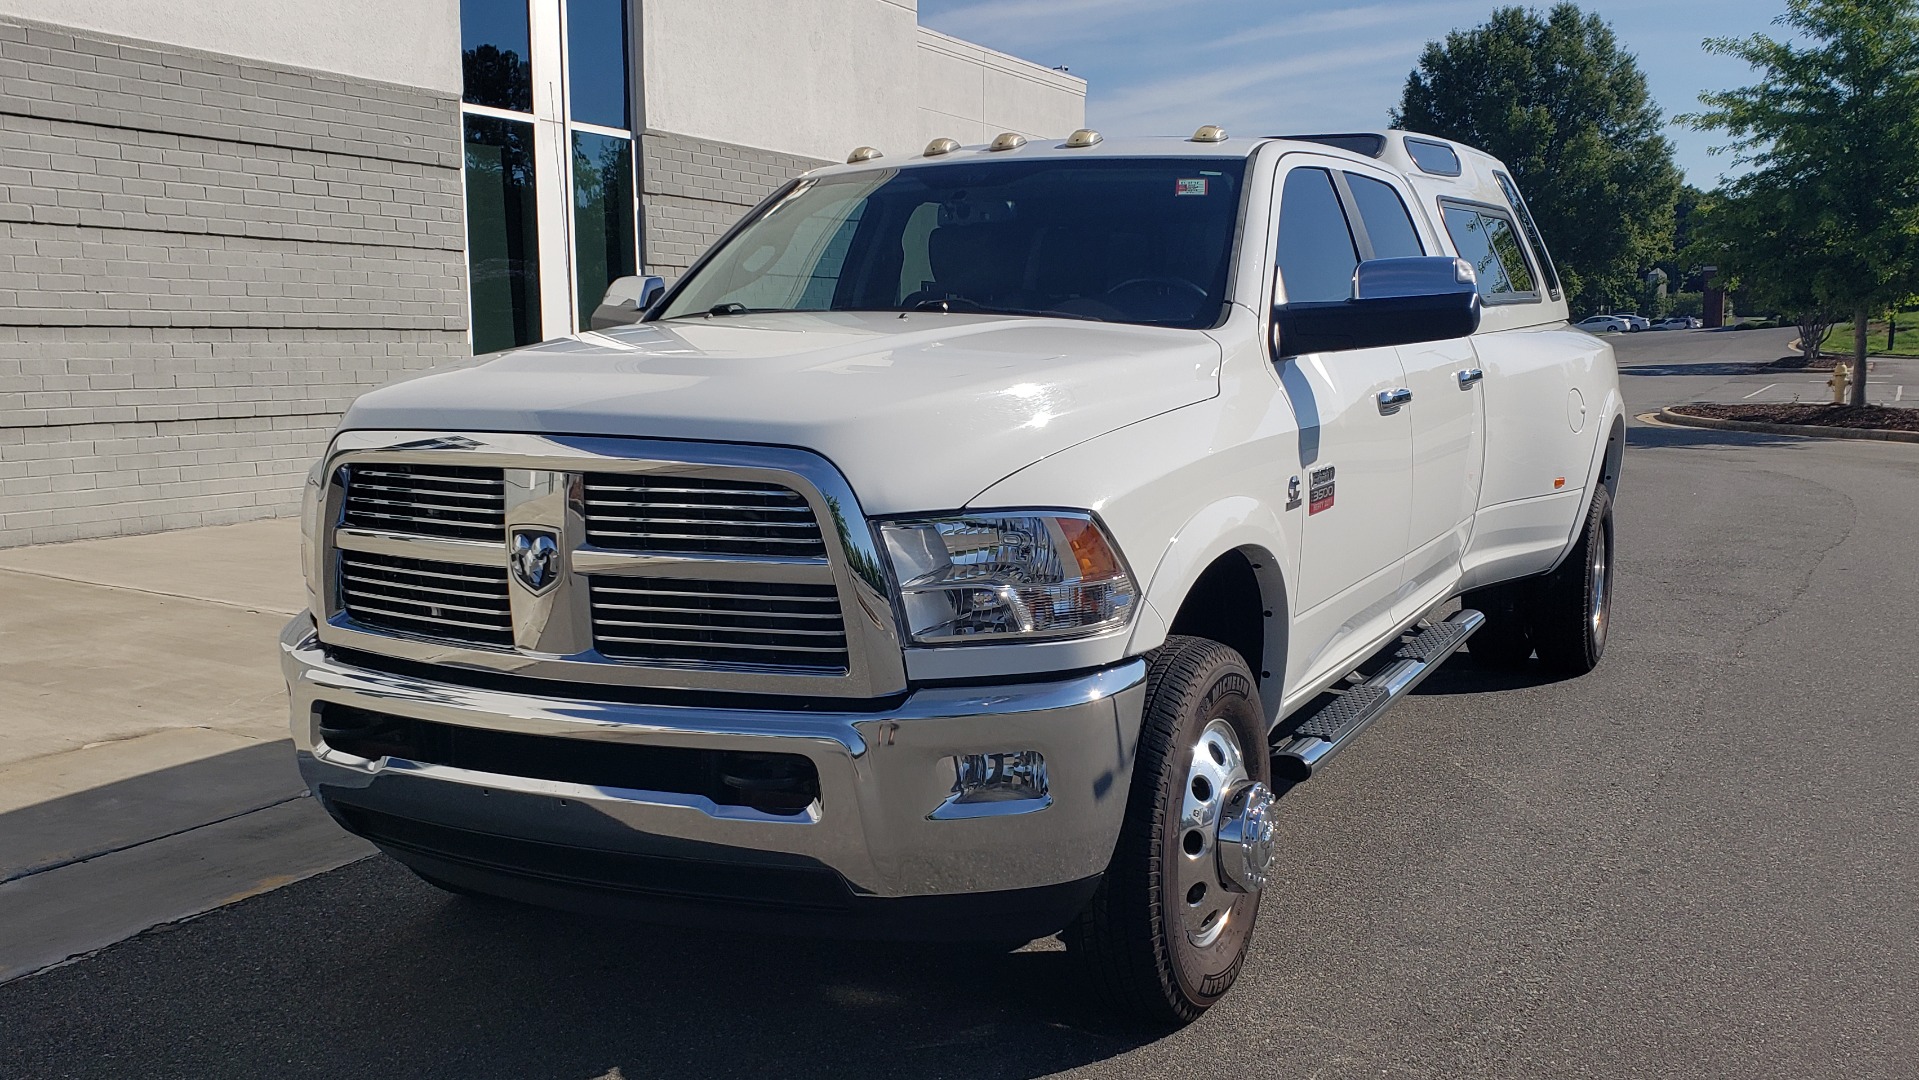 Used 2012 Ram 3500 LARAMIE 4WD CREW CAB / 169IN WB / 6.7L CUMMINS / 6-SPD AUTO for sale Sold at Formula Imports in Charlotte NC 28227 3